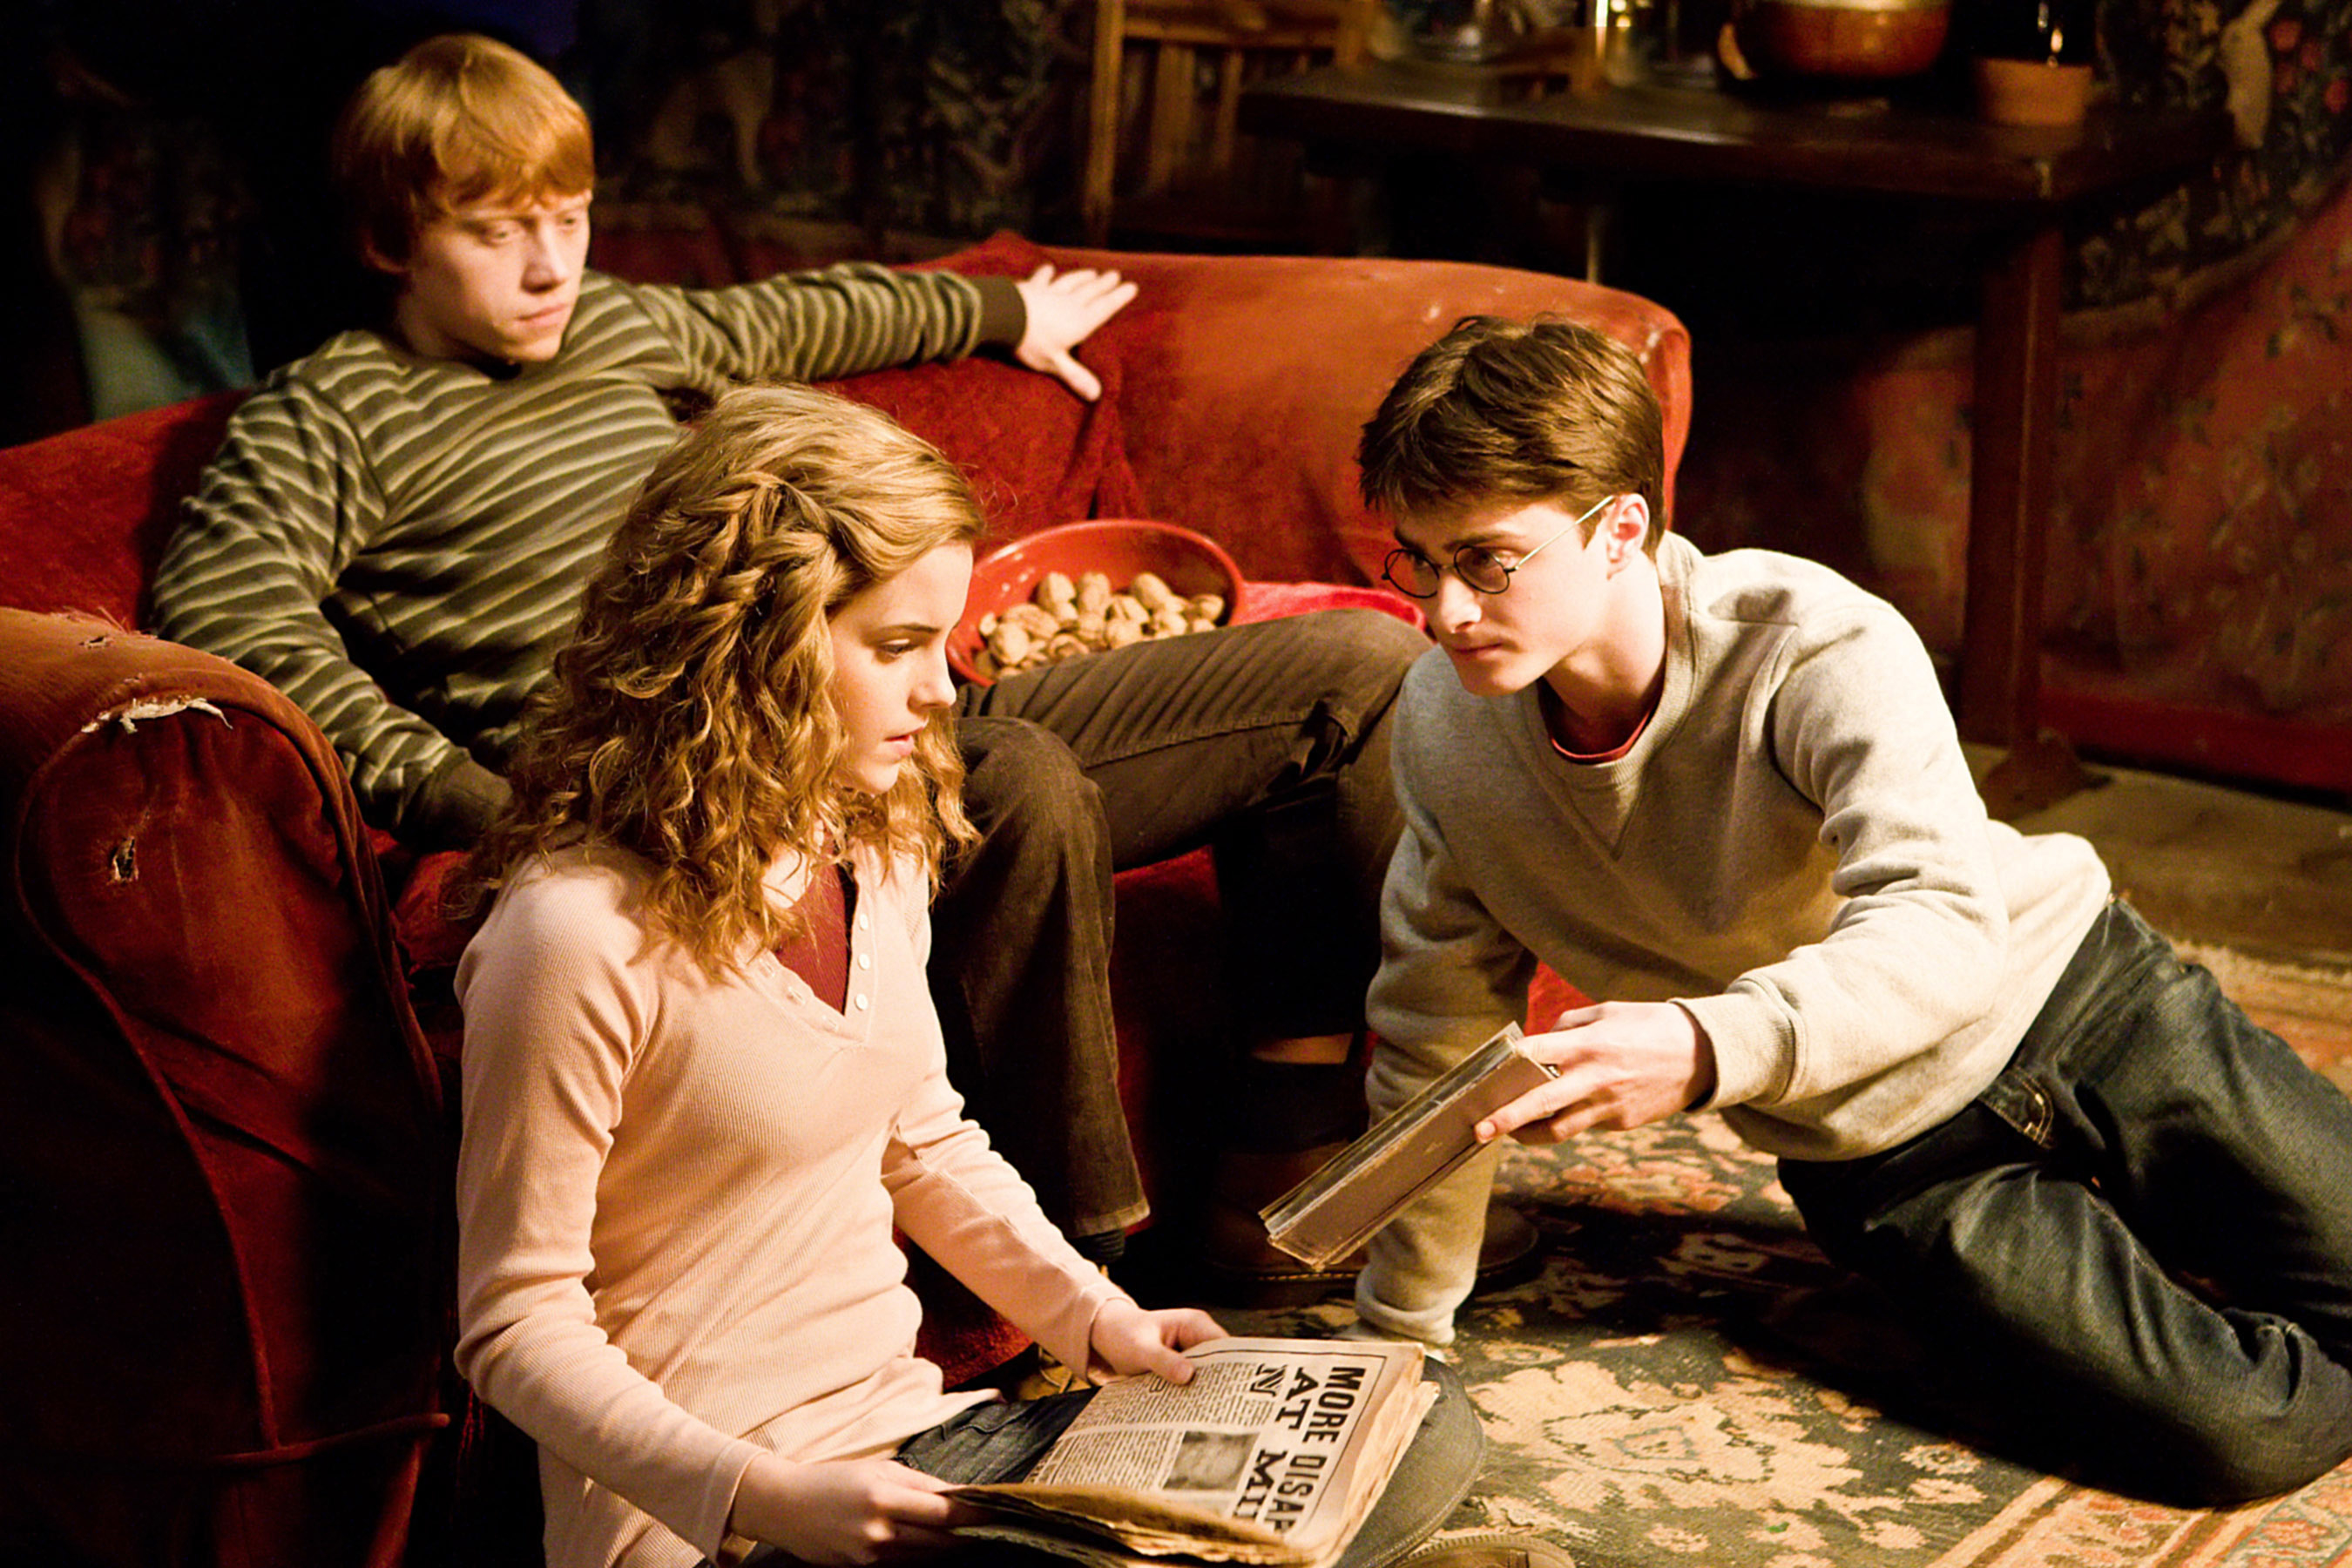 Characters Hermione Granger, Ron Weasley, and Harry Potter sitting with a newspaper in a scene from a film